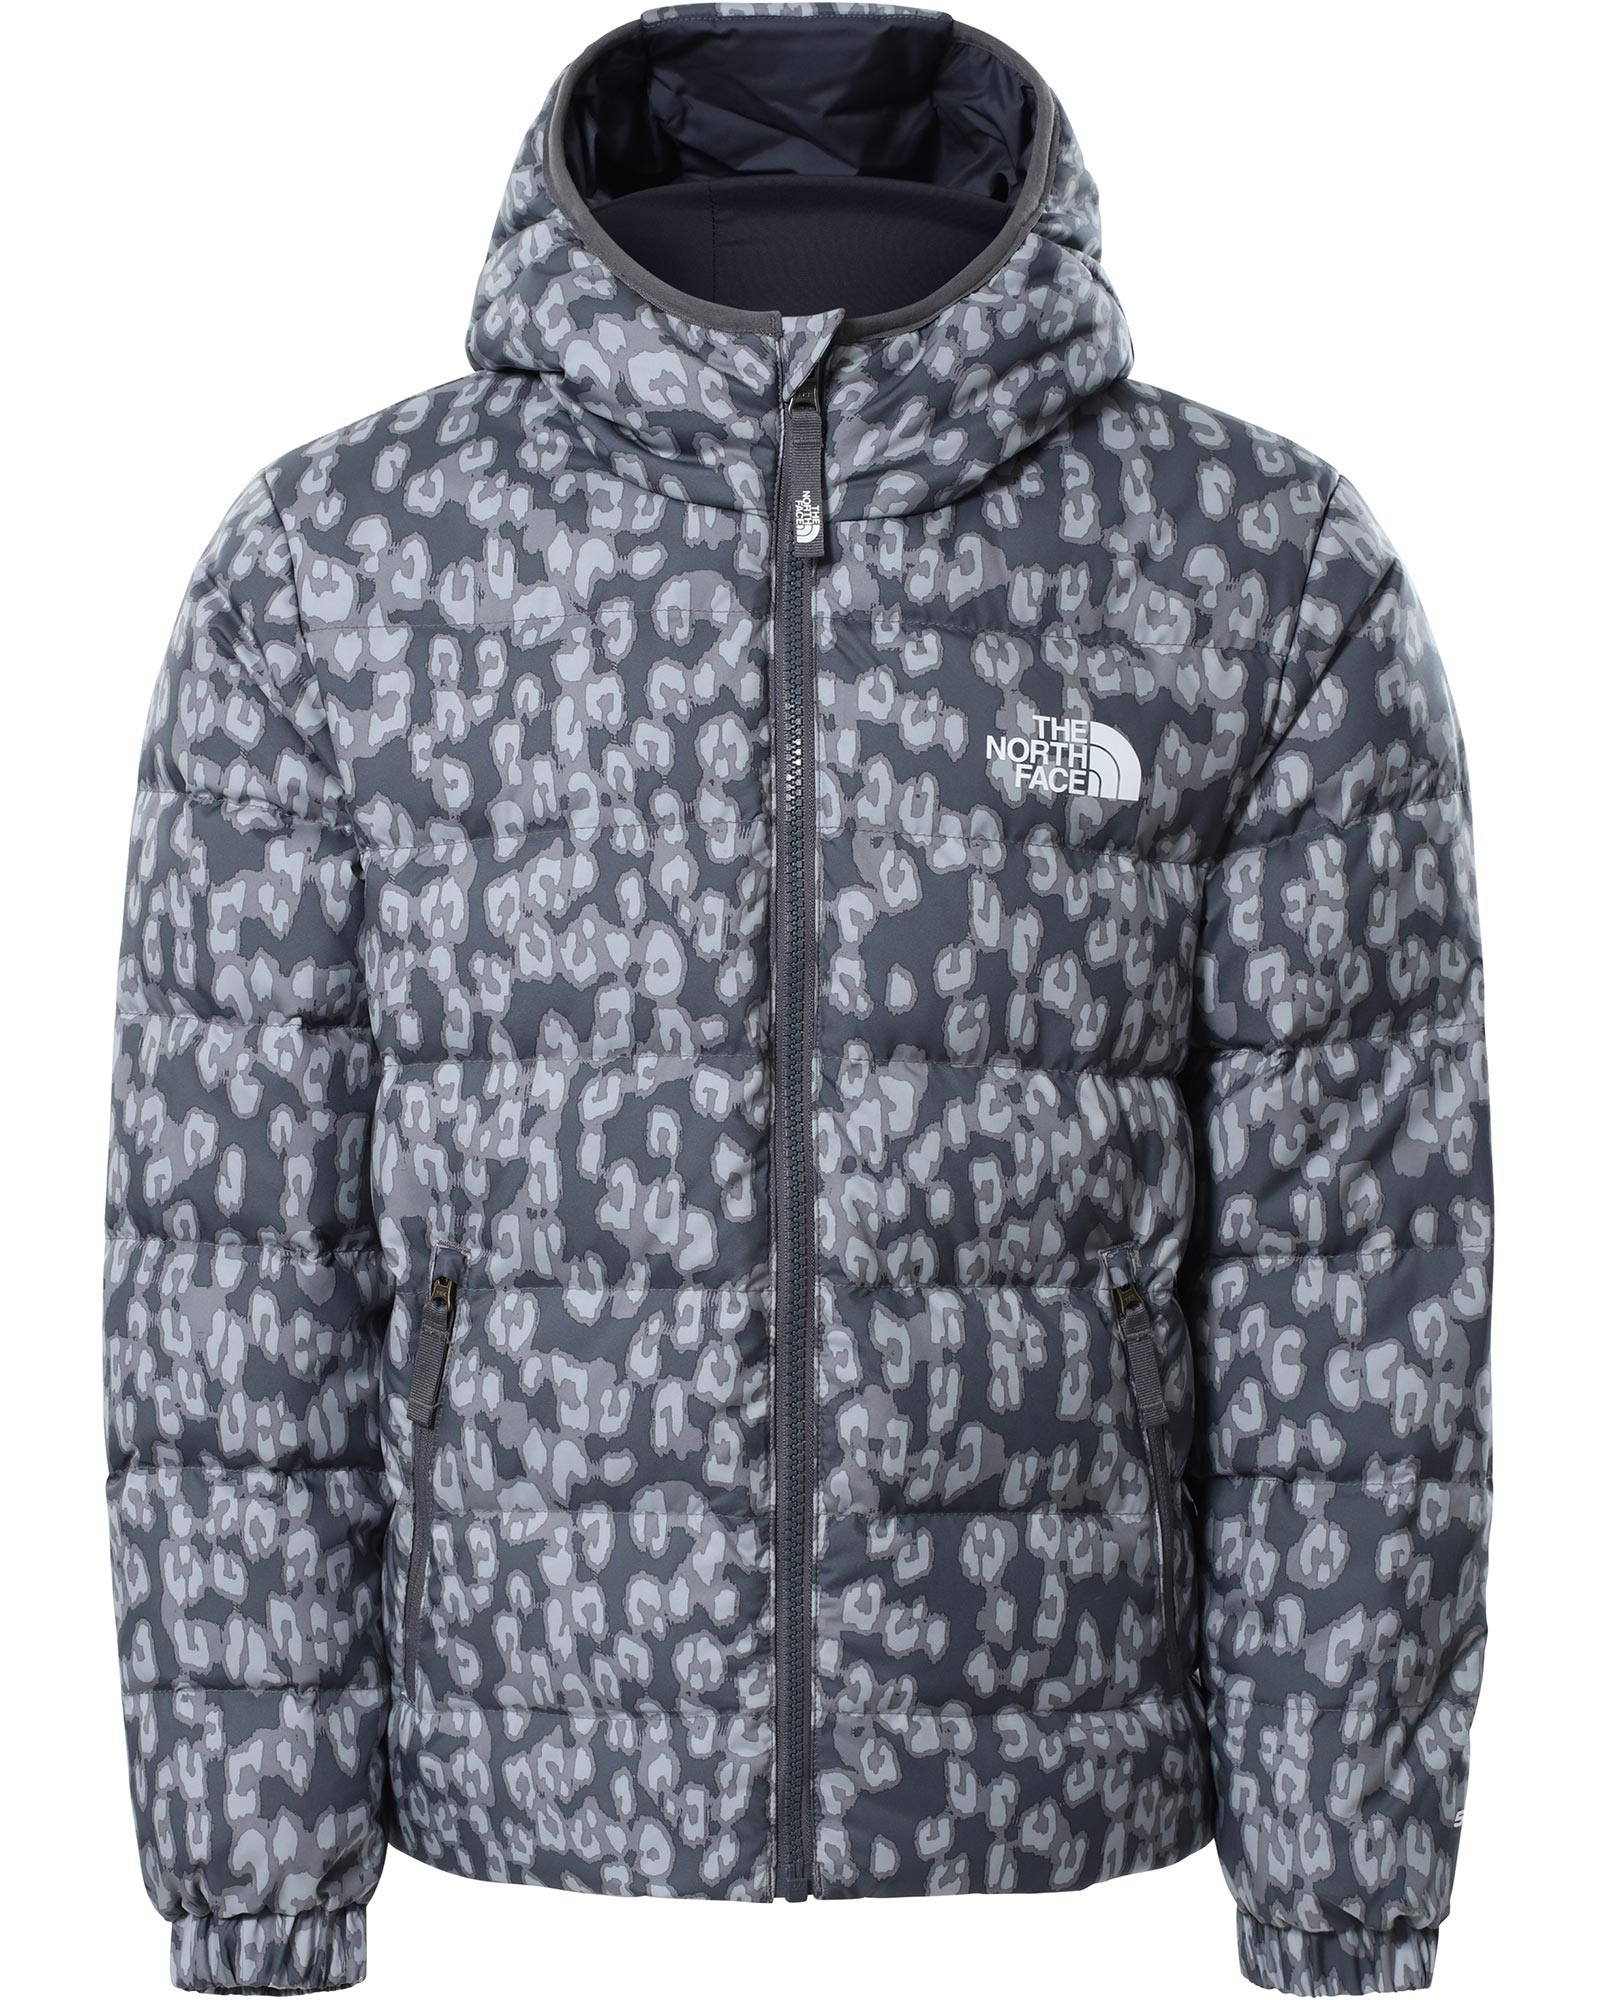 The North Face Hyalite Girls Down Jacket